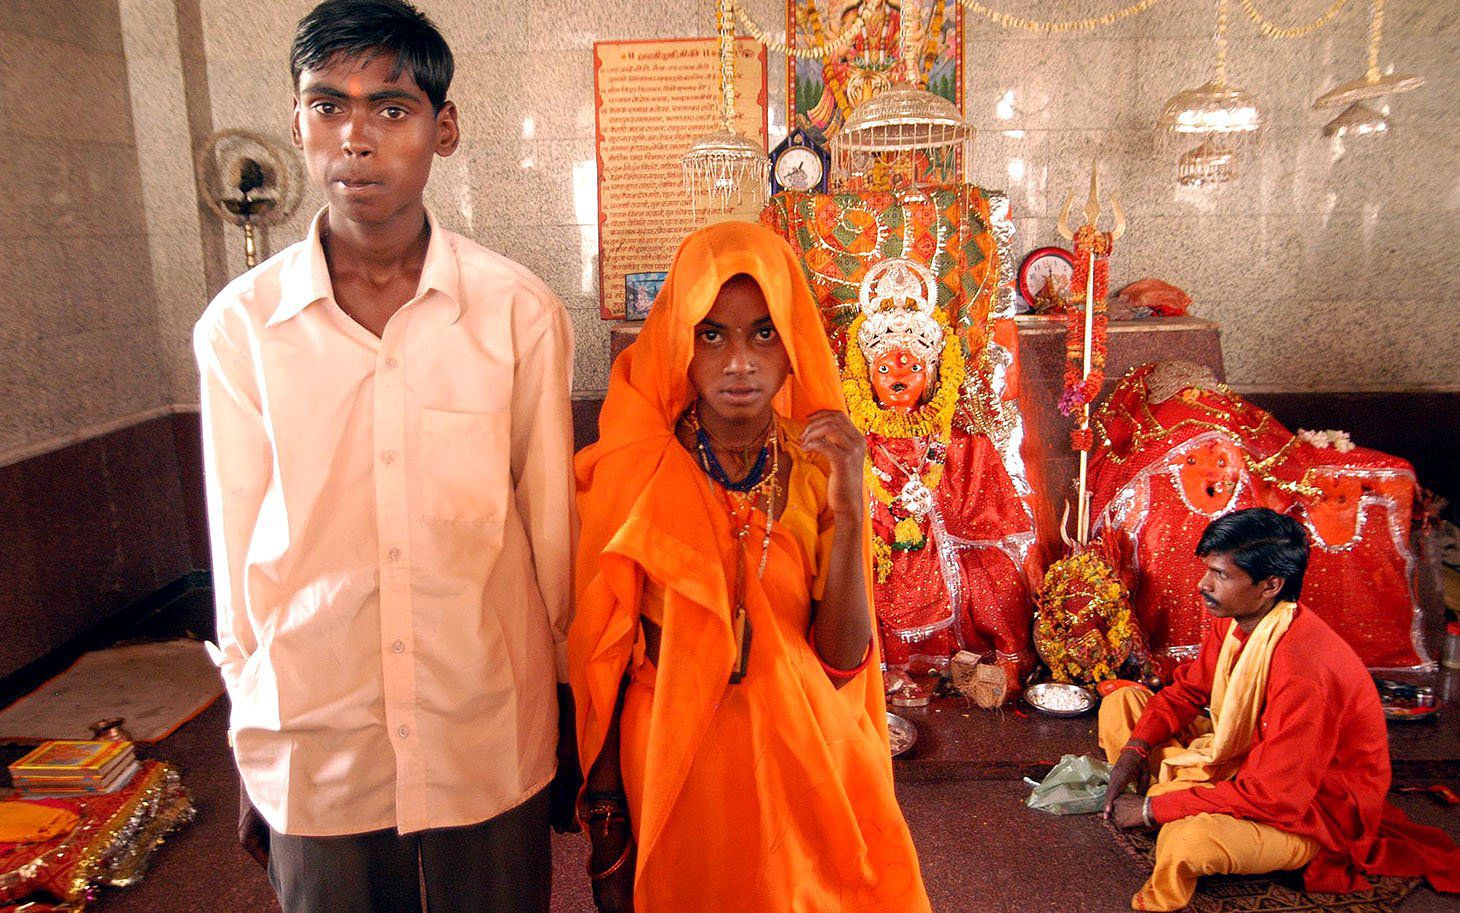 Eleven-year-old Anita, standing right, and her groom Birbal, 16, pose for a photograph after their marriage, as a priest looks on at Jalpa Mata temple in Rajgarh, about 155 kilometers (96 miles), northwest of Bhopal, India, Sunday, April, 30, 2006. Ignoring laws that ban child marriages, hundreds of children, some as young as seven years old, were married in a centuries-old custom across central and western India this week, according to news reports. (AP Photo/Prakash Hatvalne)